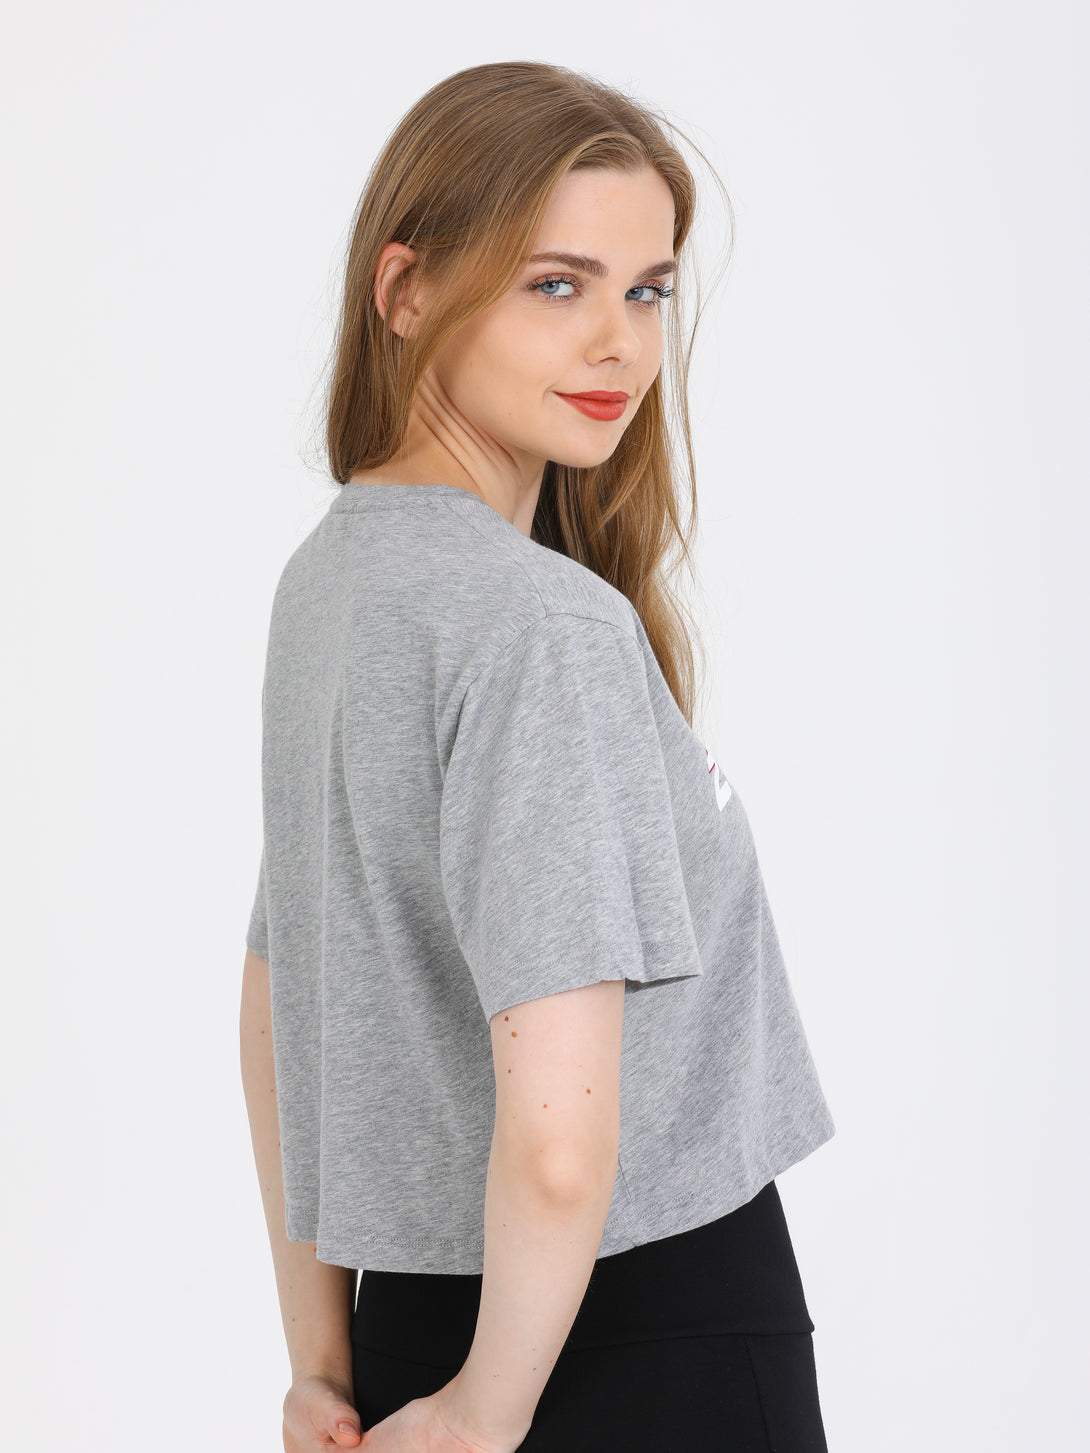 A Woman Wearing Light Grey Melange Color Zen And Chill Crop Tee